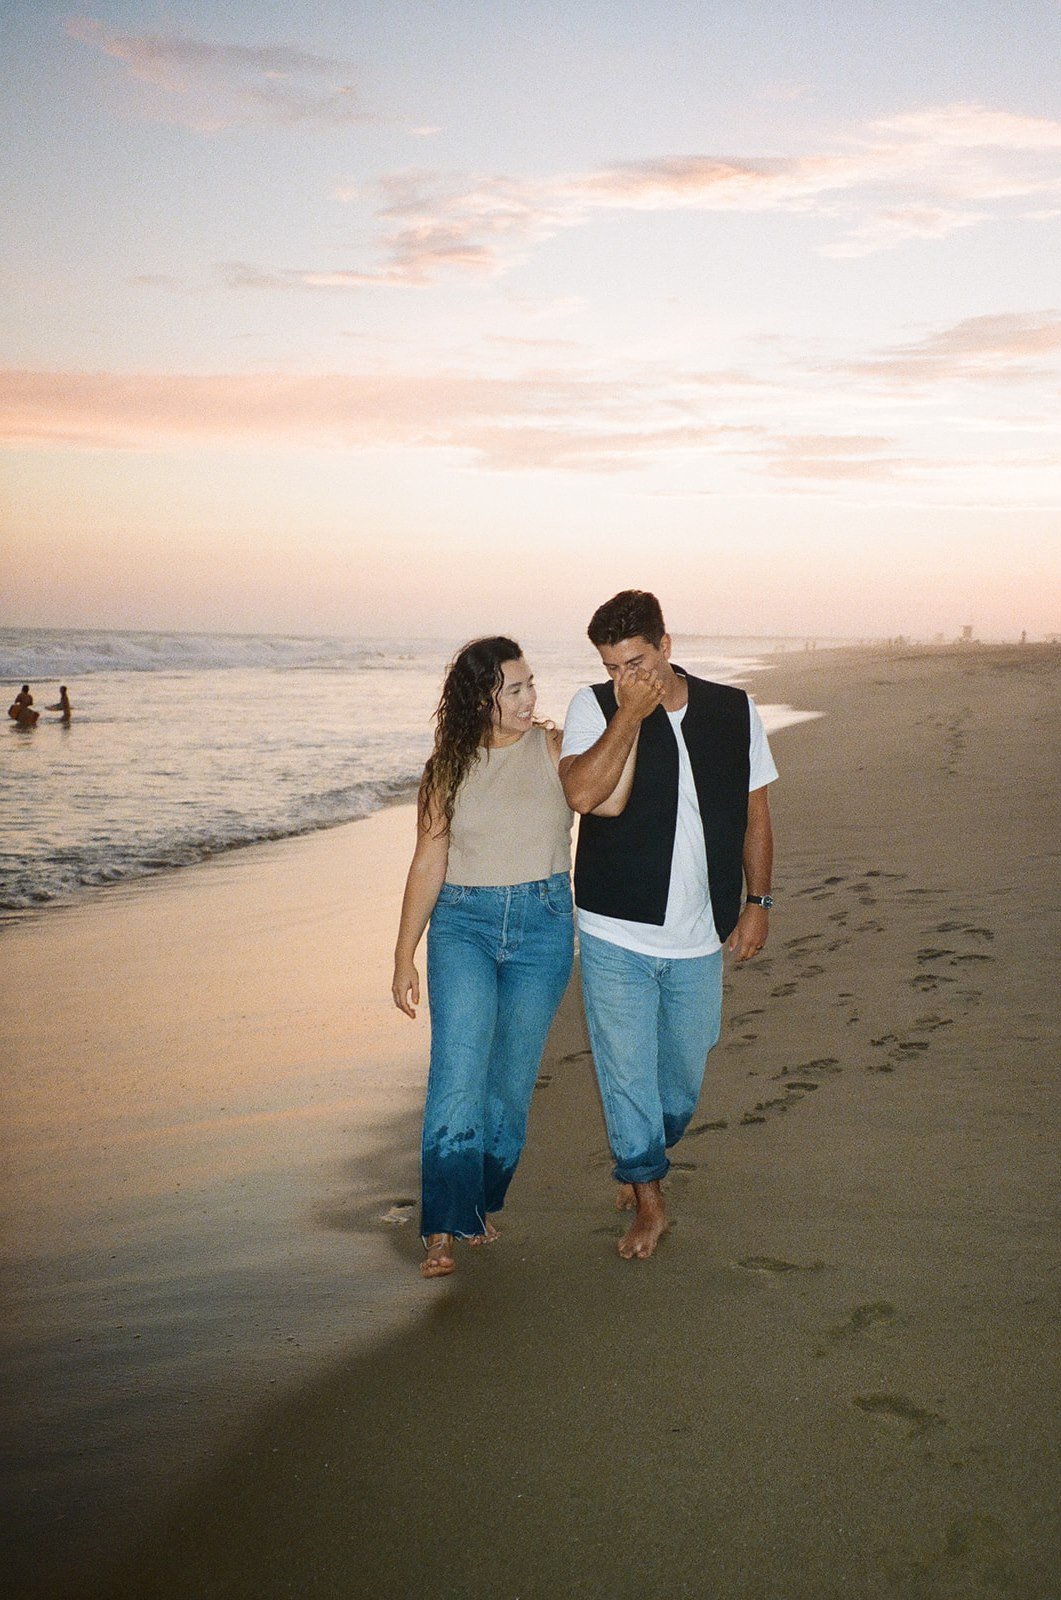 Newport Beach Engagement photo session on the beach during sunset on film